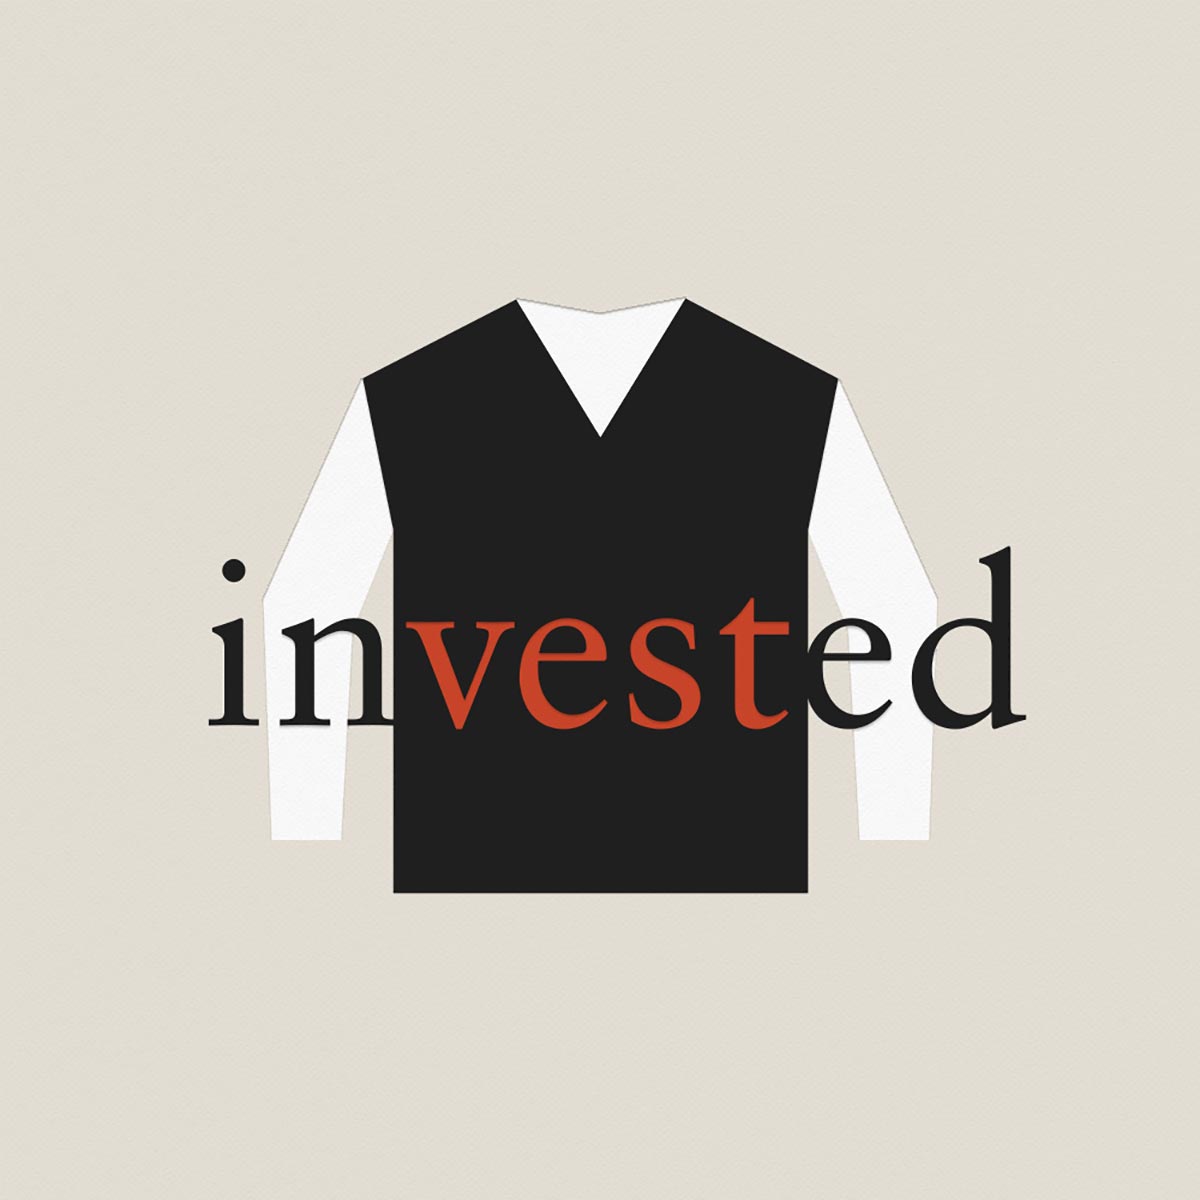 invested